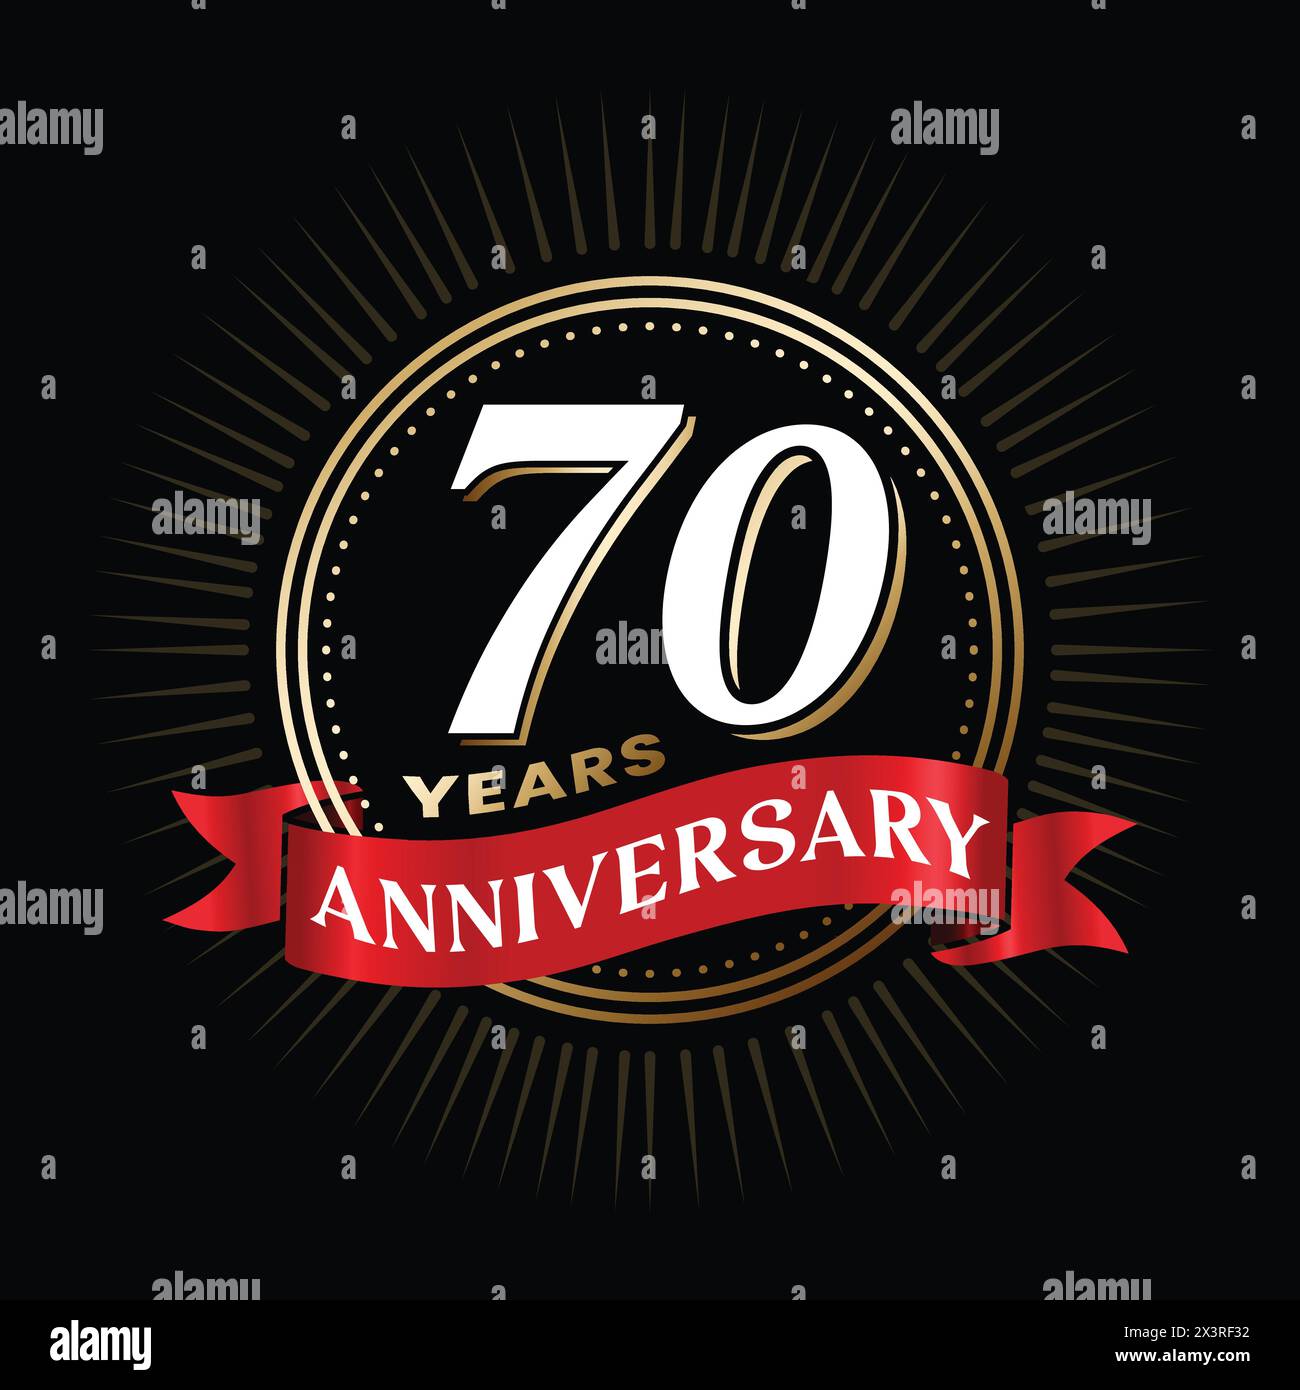 70 years anniversary logo design with red color ribbon and gold shiny circle celebration elements. 70th wedding anniversary poster, template. Company Stock Vector